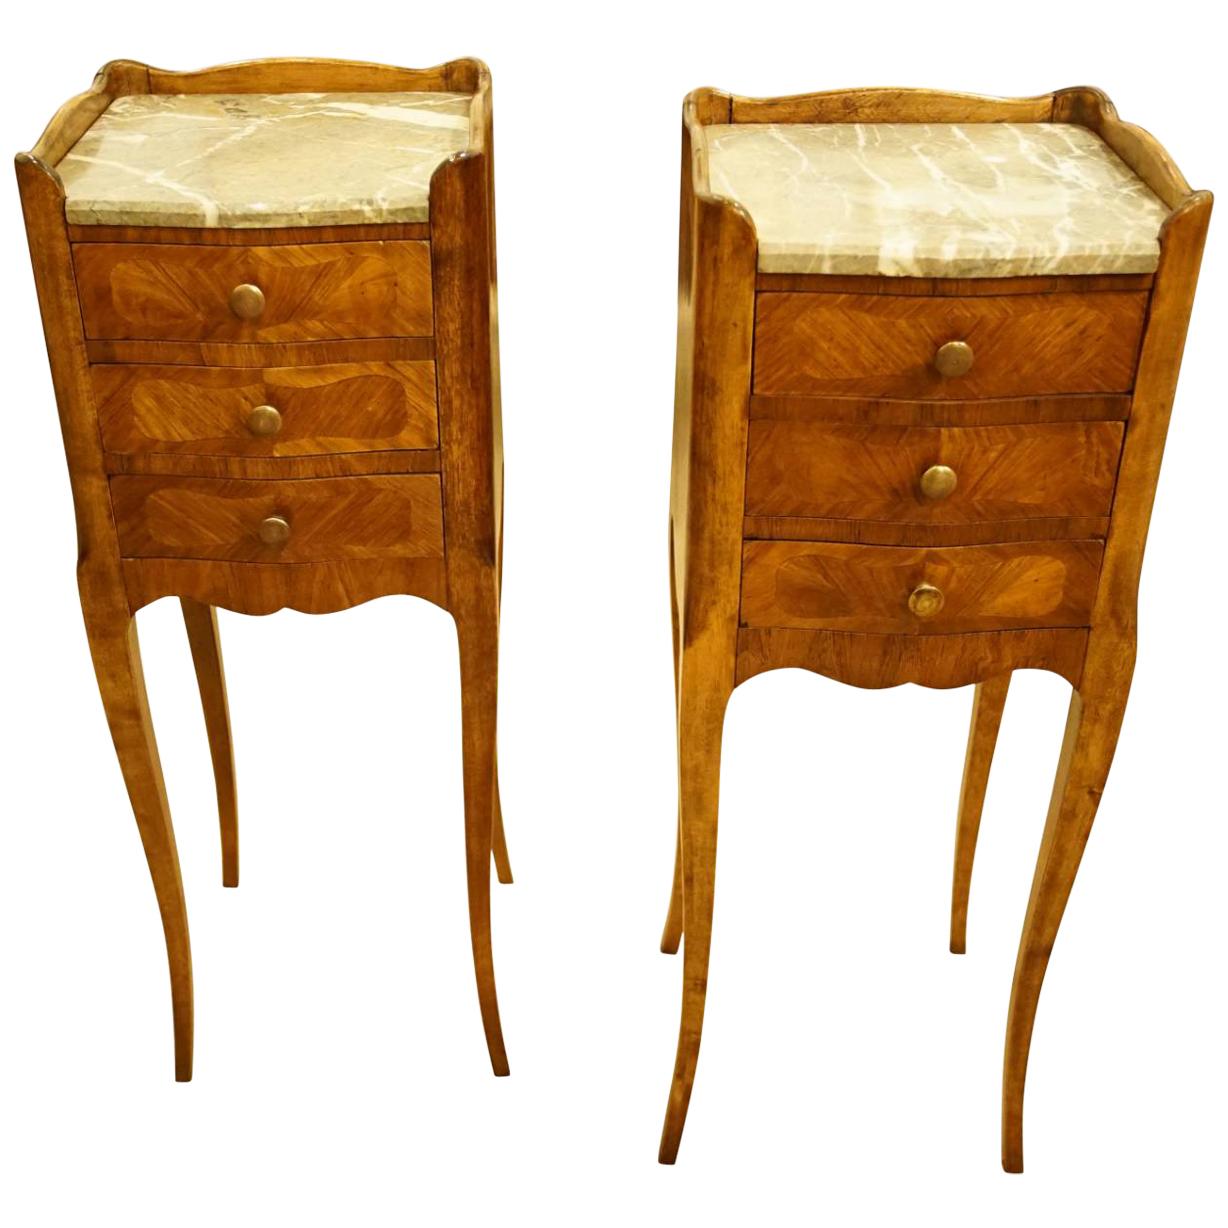 Pair of French Louis XVI Bedside Chests